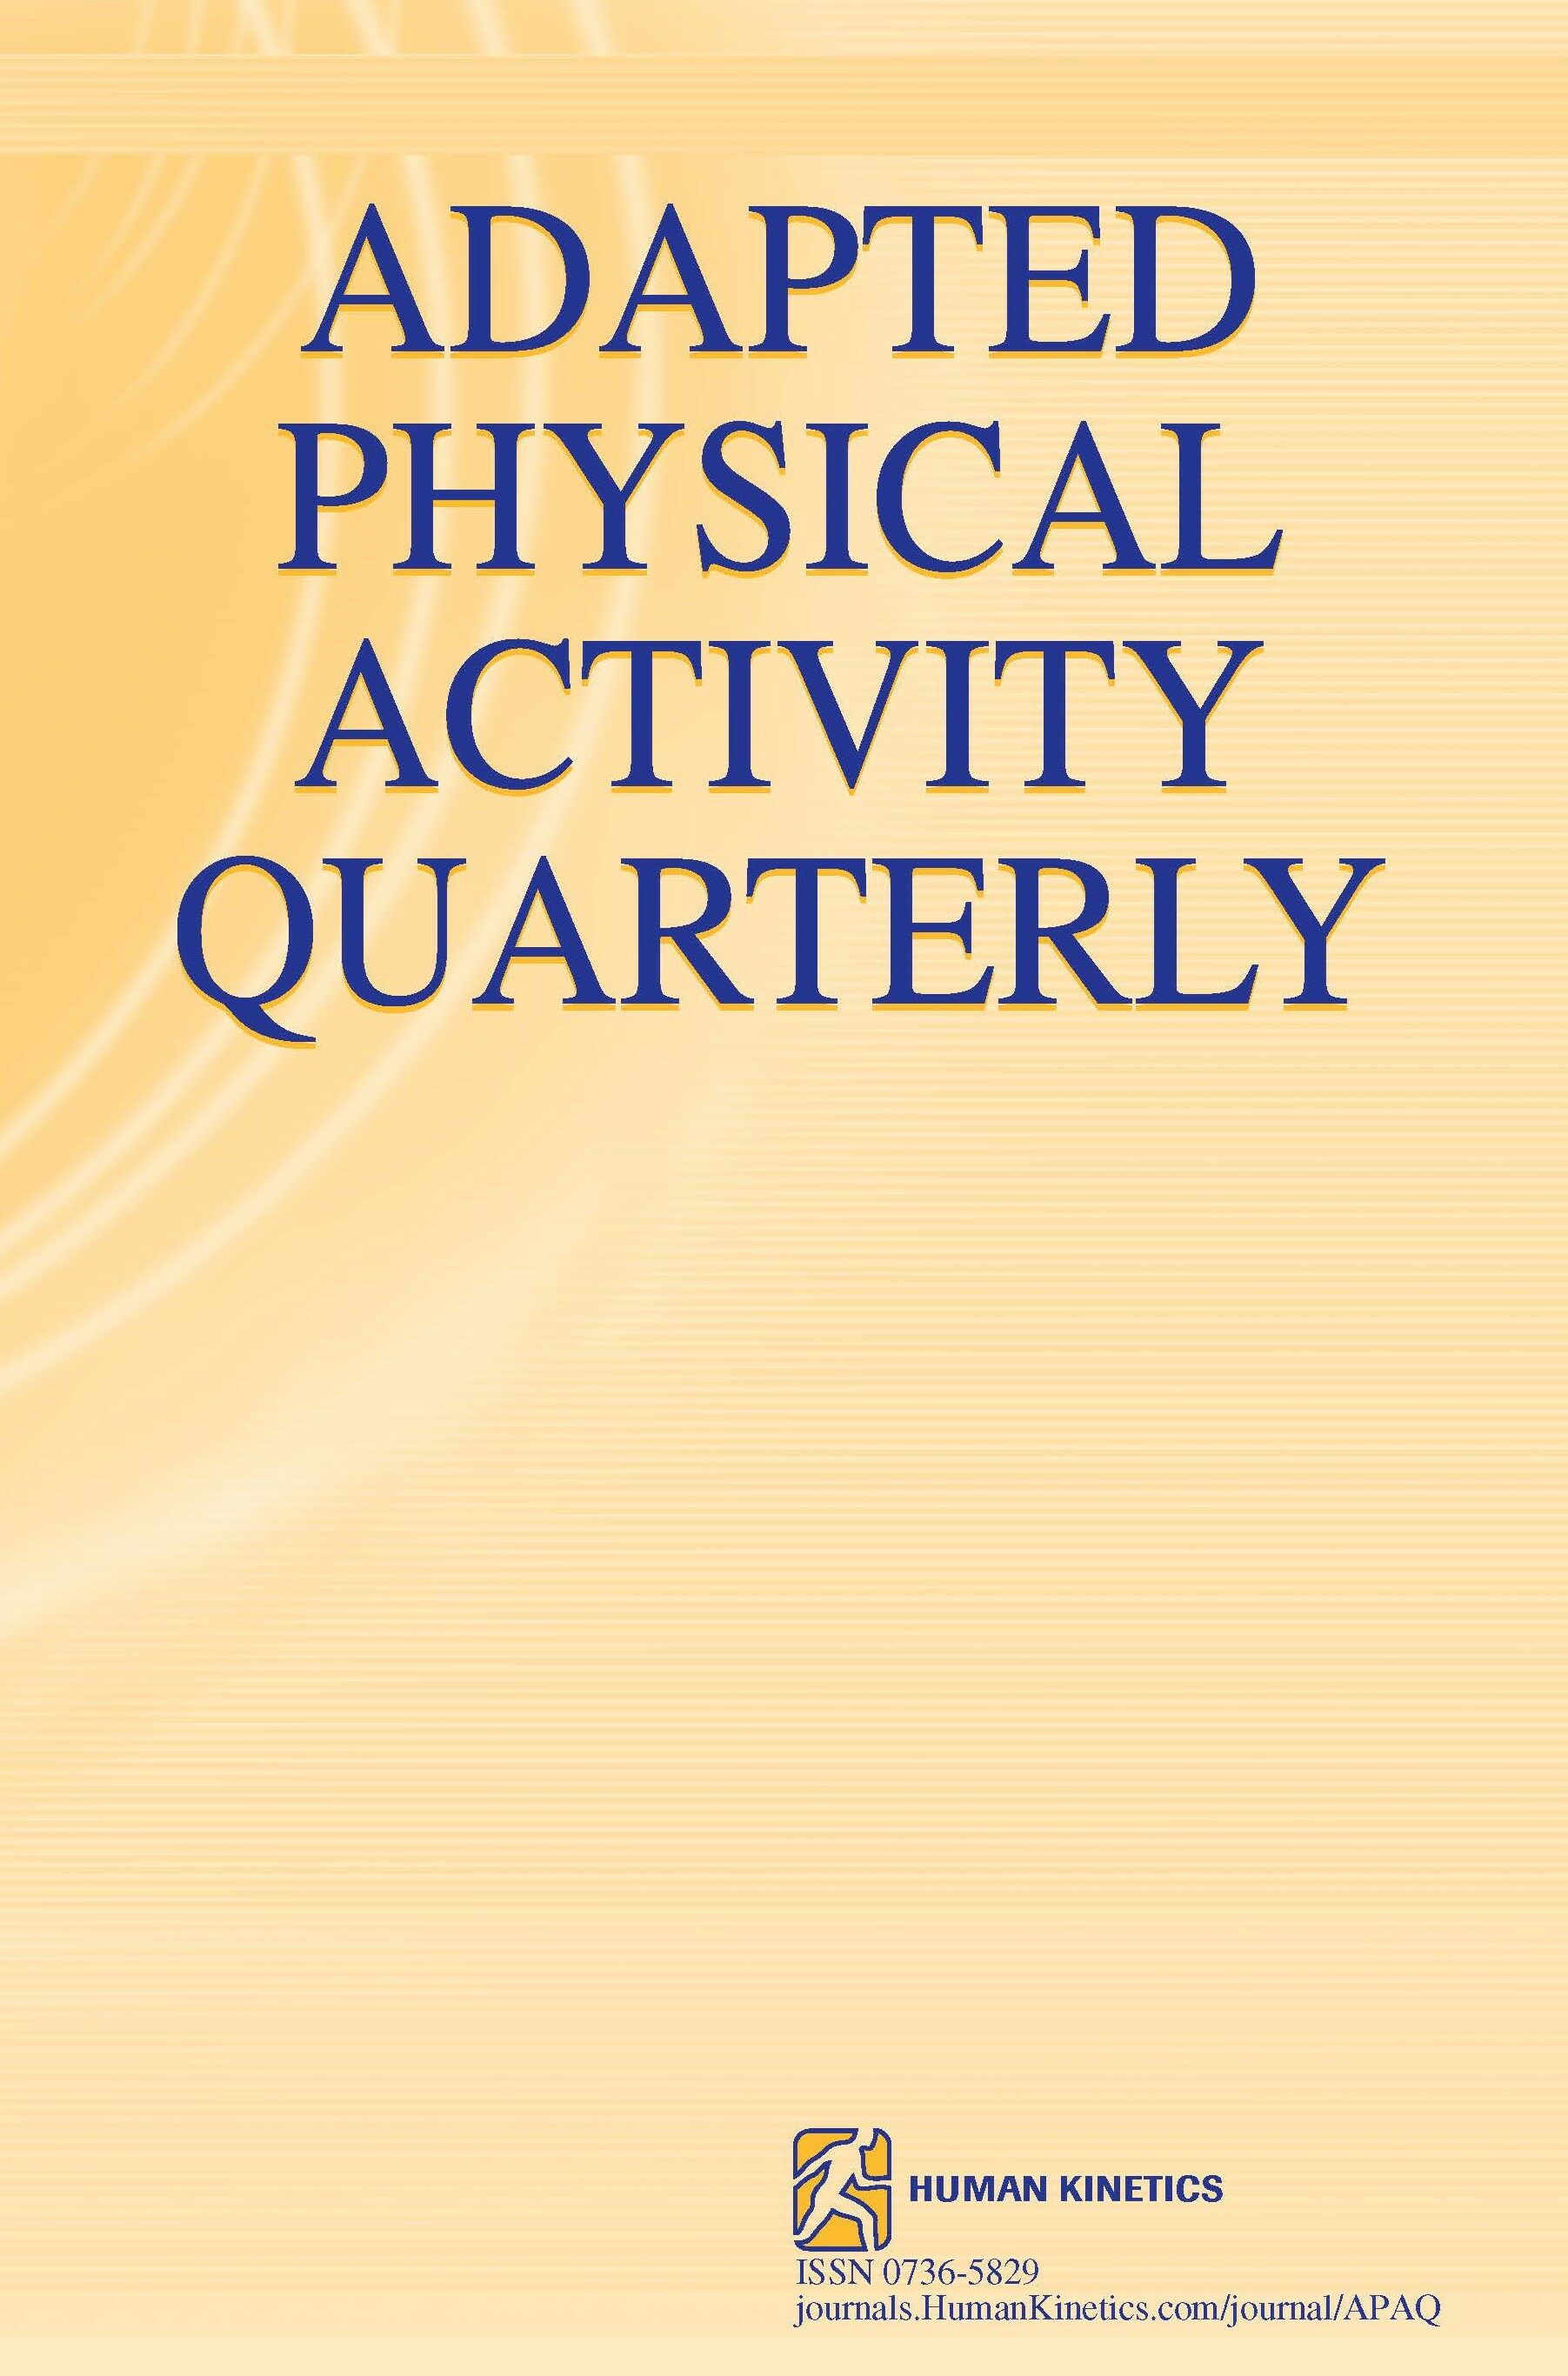 Results From Spain’s 2022 Para Report Cards on Physical Activity of Children and Adolescents With Disabilities